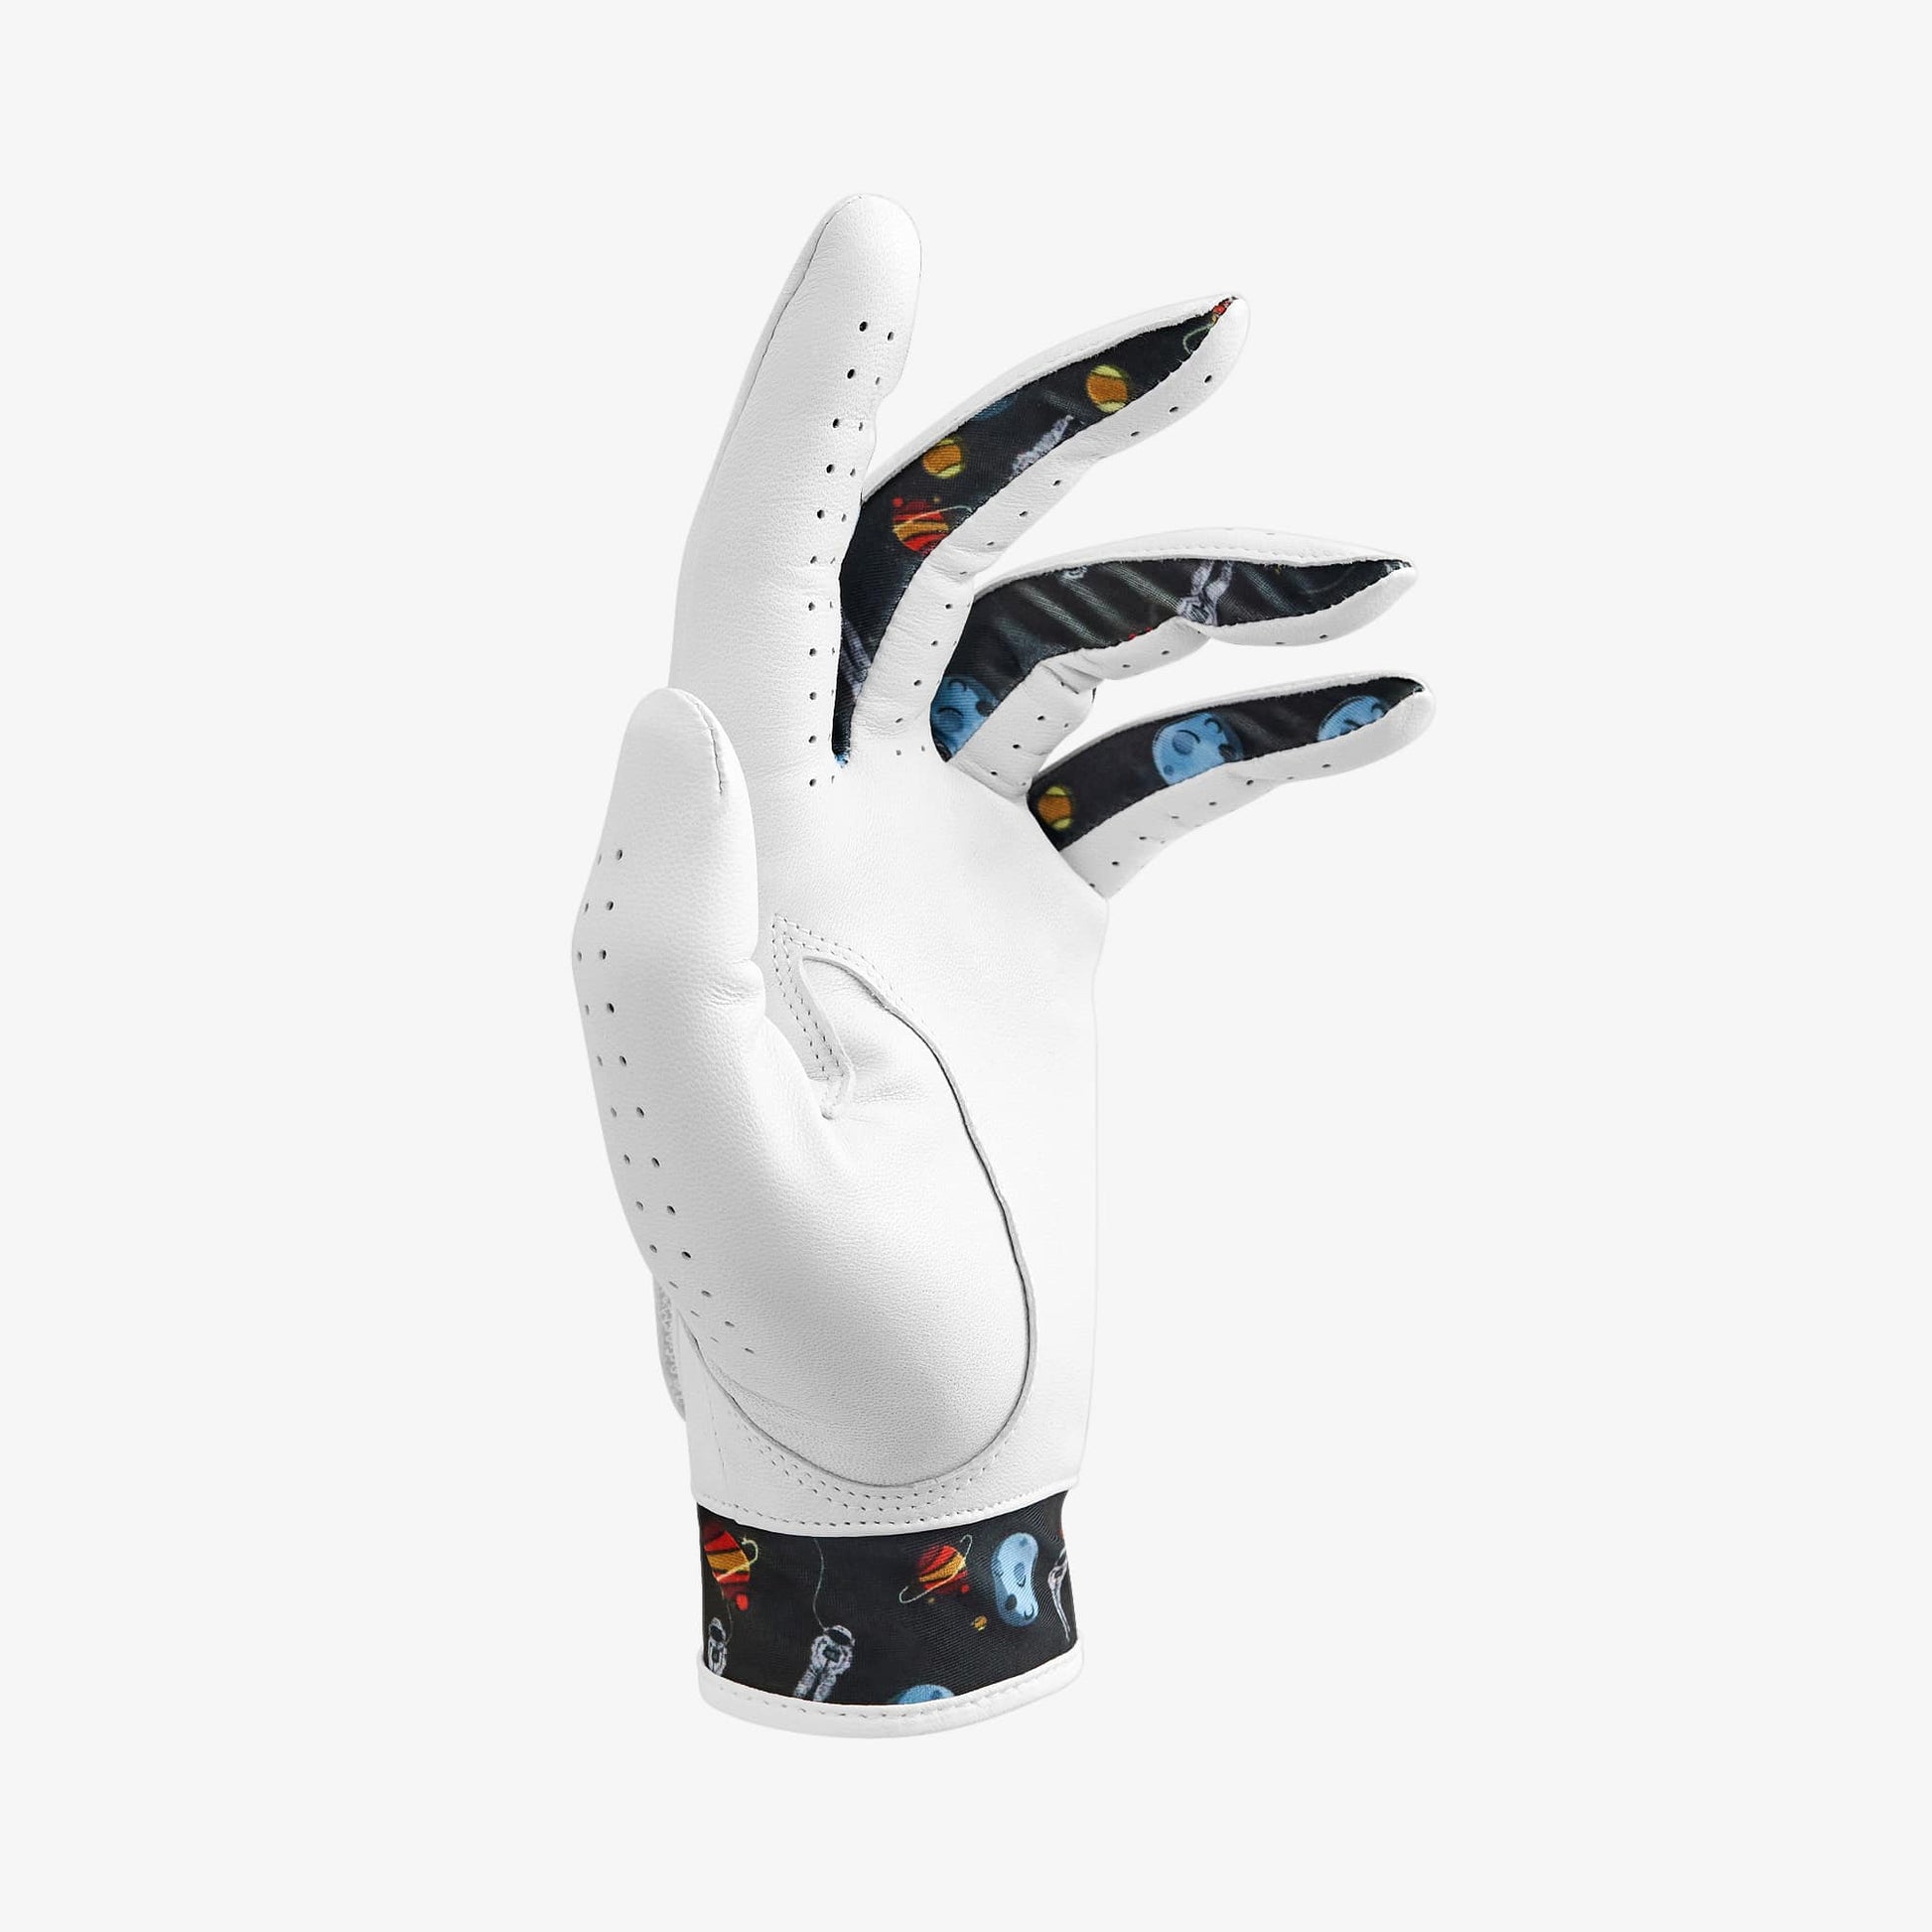 White leather golf glove with moon design